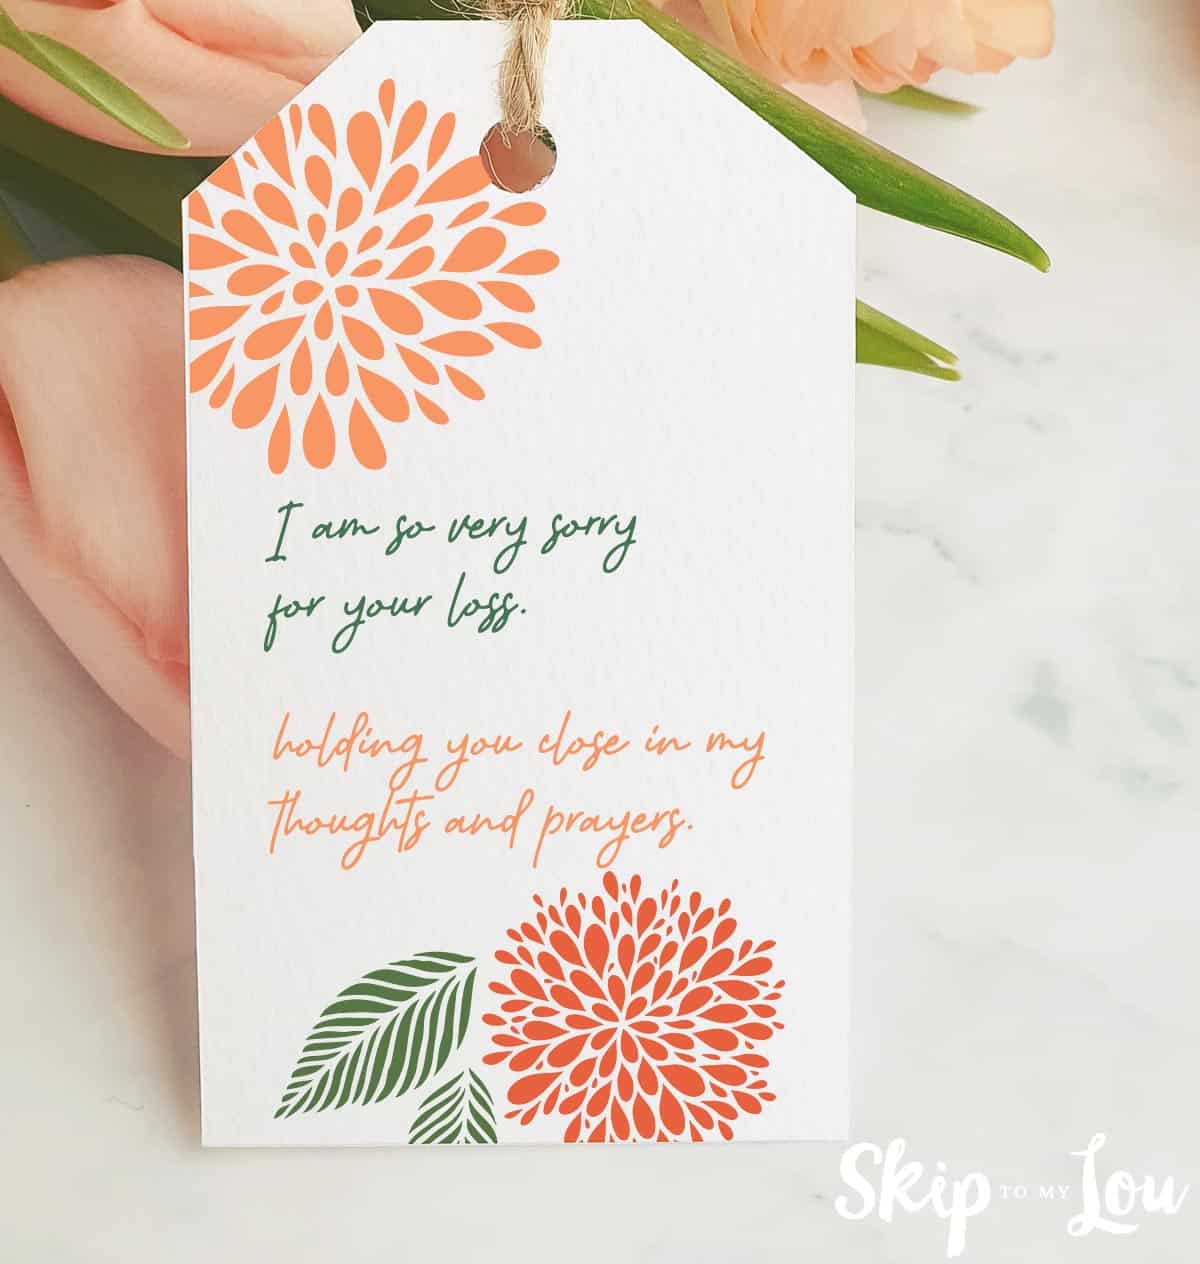 sympathy message tag tied to a bouquet of flowers.